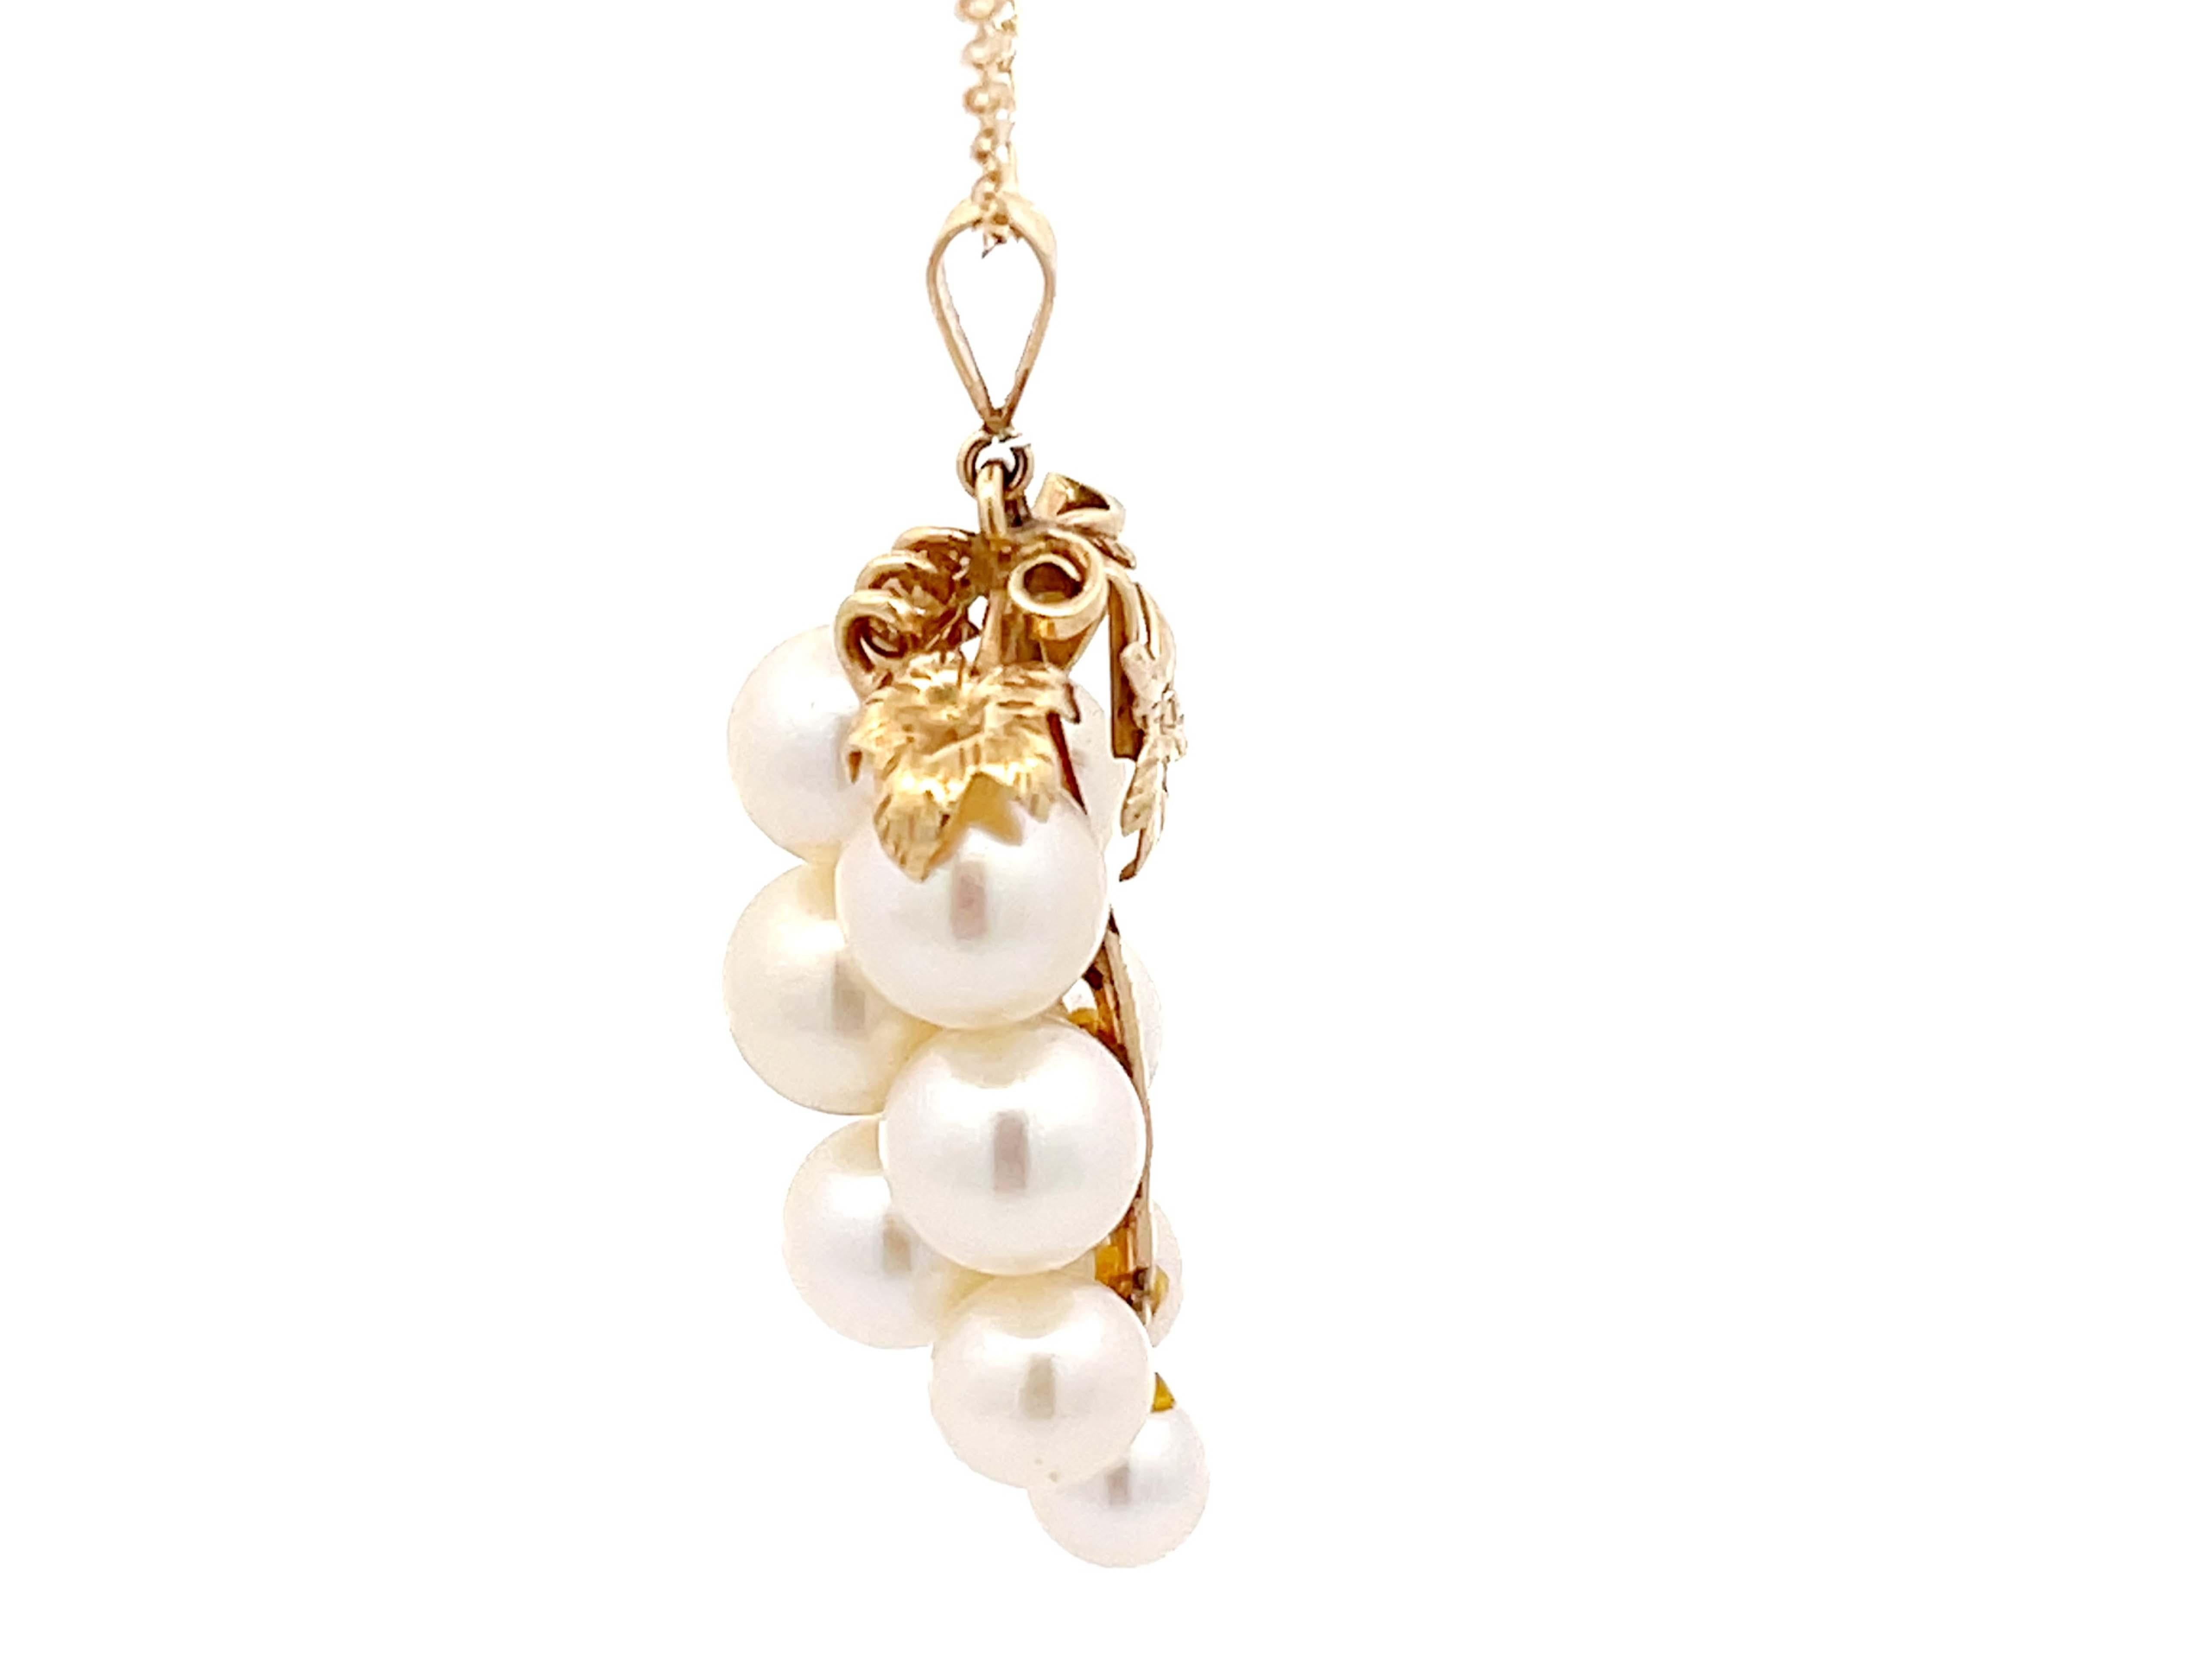 Mings Hawaii Pearl and Leaf Pendant in 14k Yellow Gold with Chain In Excellent Condition For Sale In Honolulu, HI